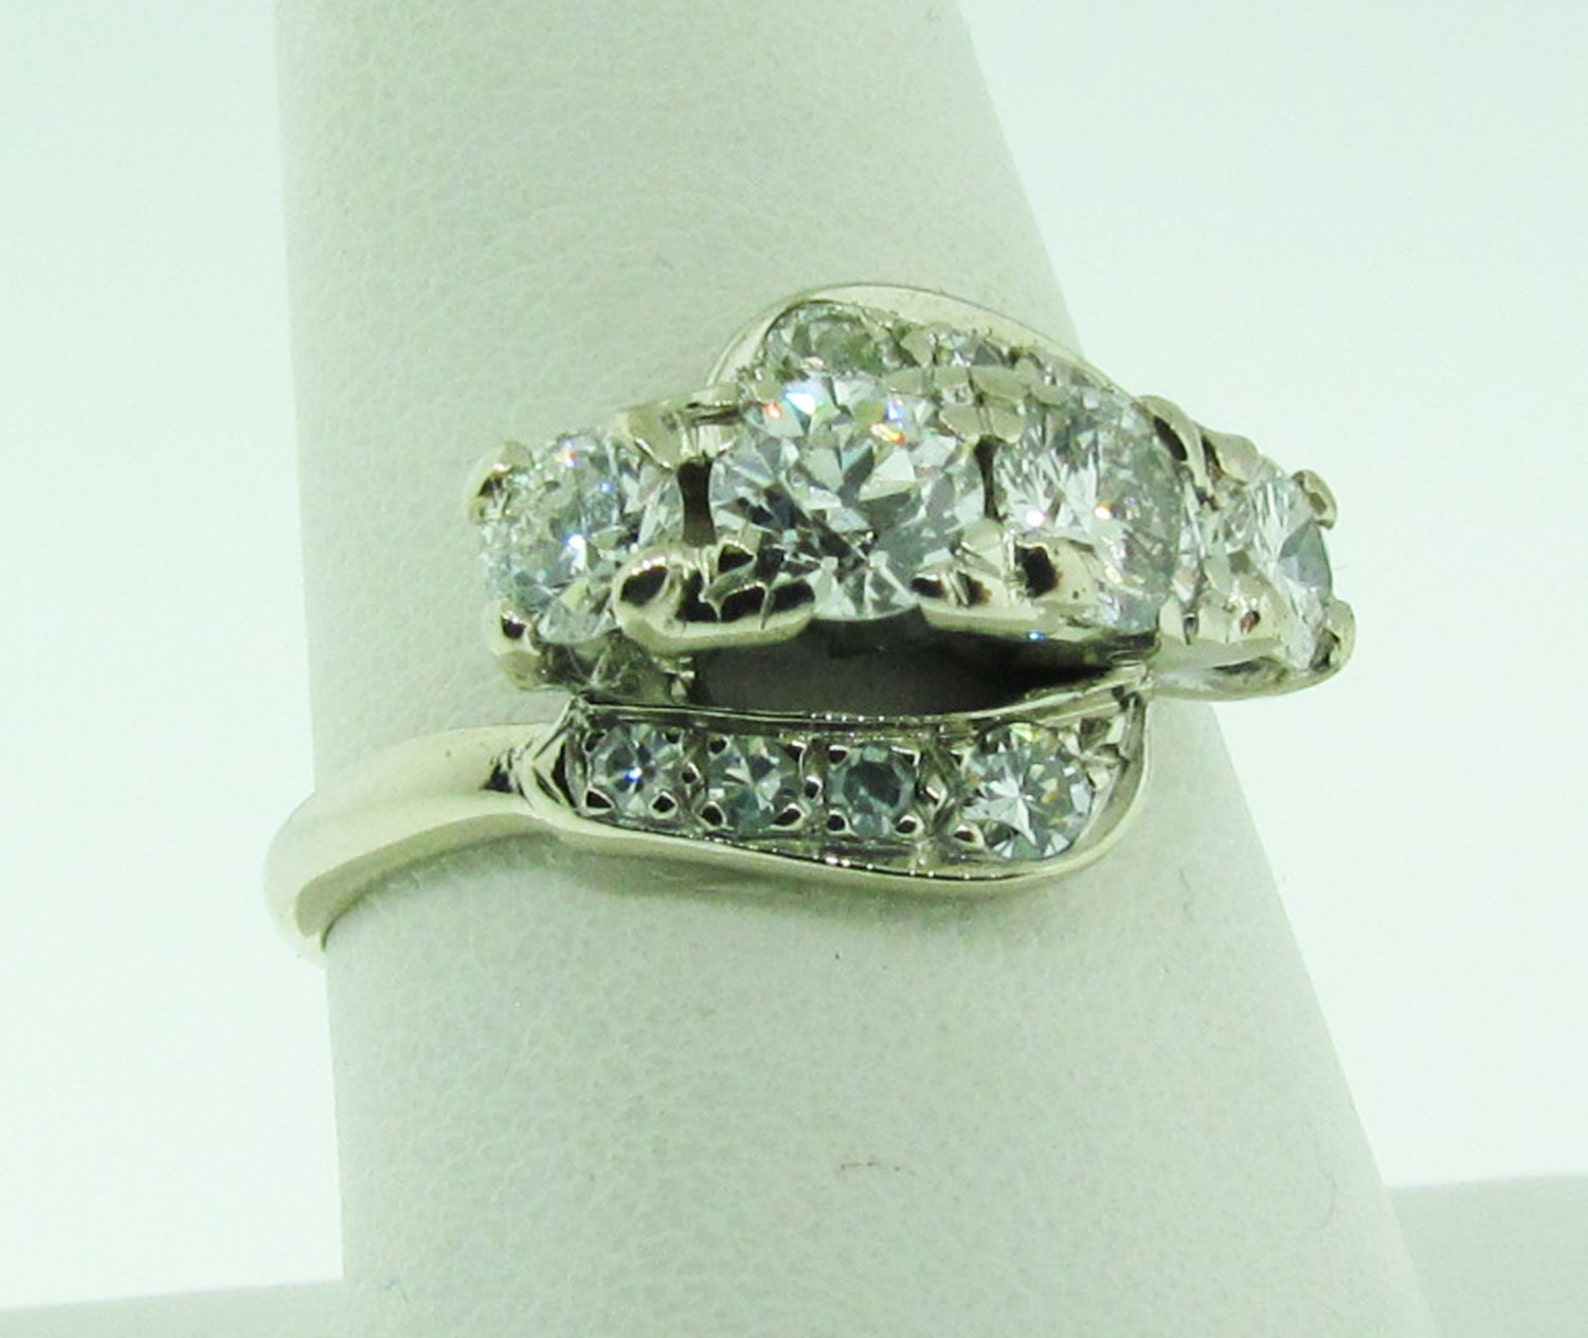 Antique White Gold and Diamond Ring. - Etsy